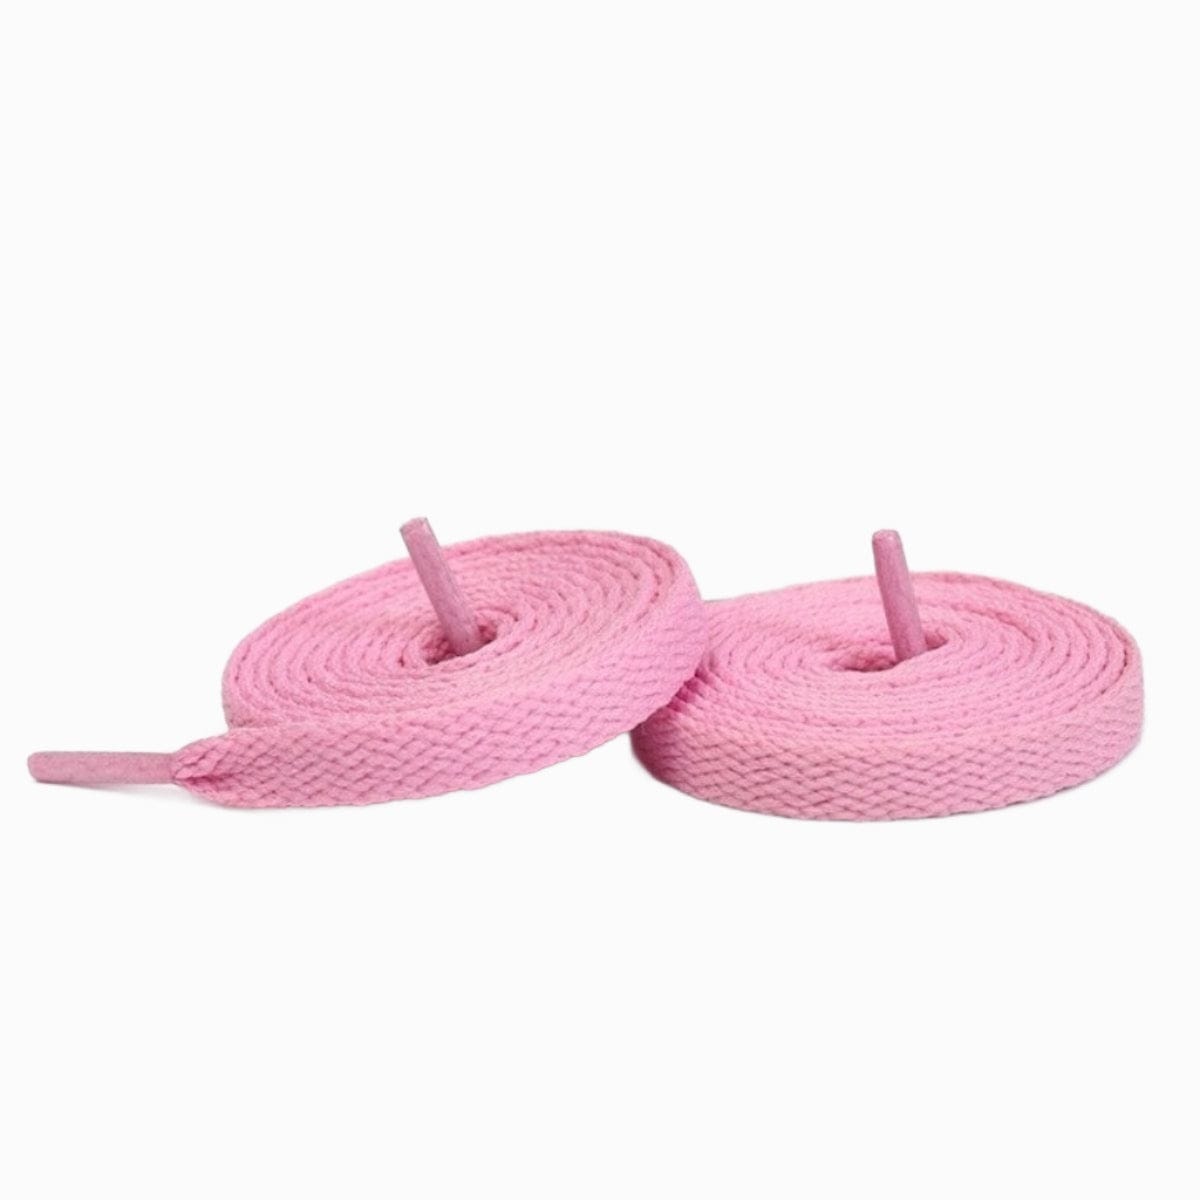 Pink Replacement Laces for Adidas Continental 80 Sneakers by Kicks Shoelaces